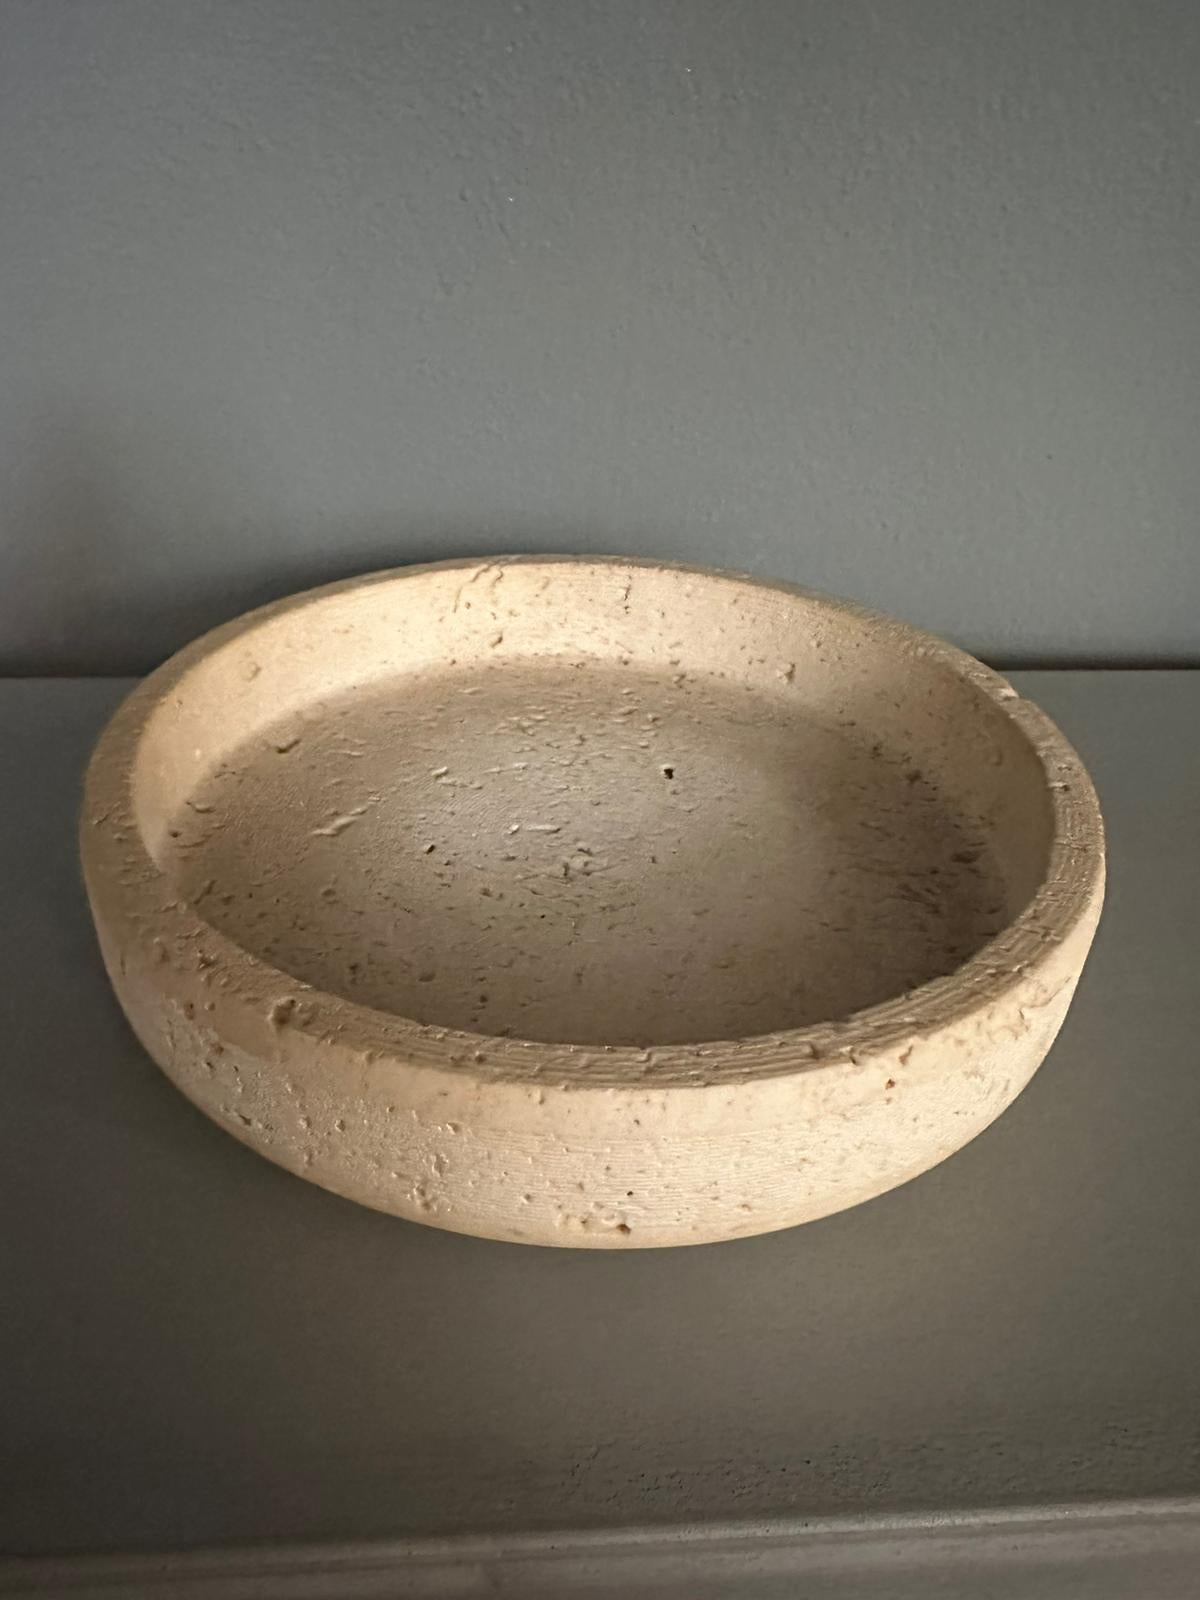 Travertine marble centerpiece designed by Egidio Di Giusti for Up & Up in 1970. Travertine marble centerpiece with a 20diameter of about cm. The marble shows all its material making the centerpiece elegant.